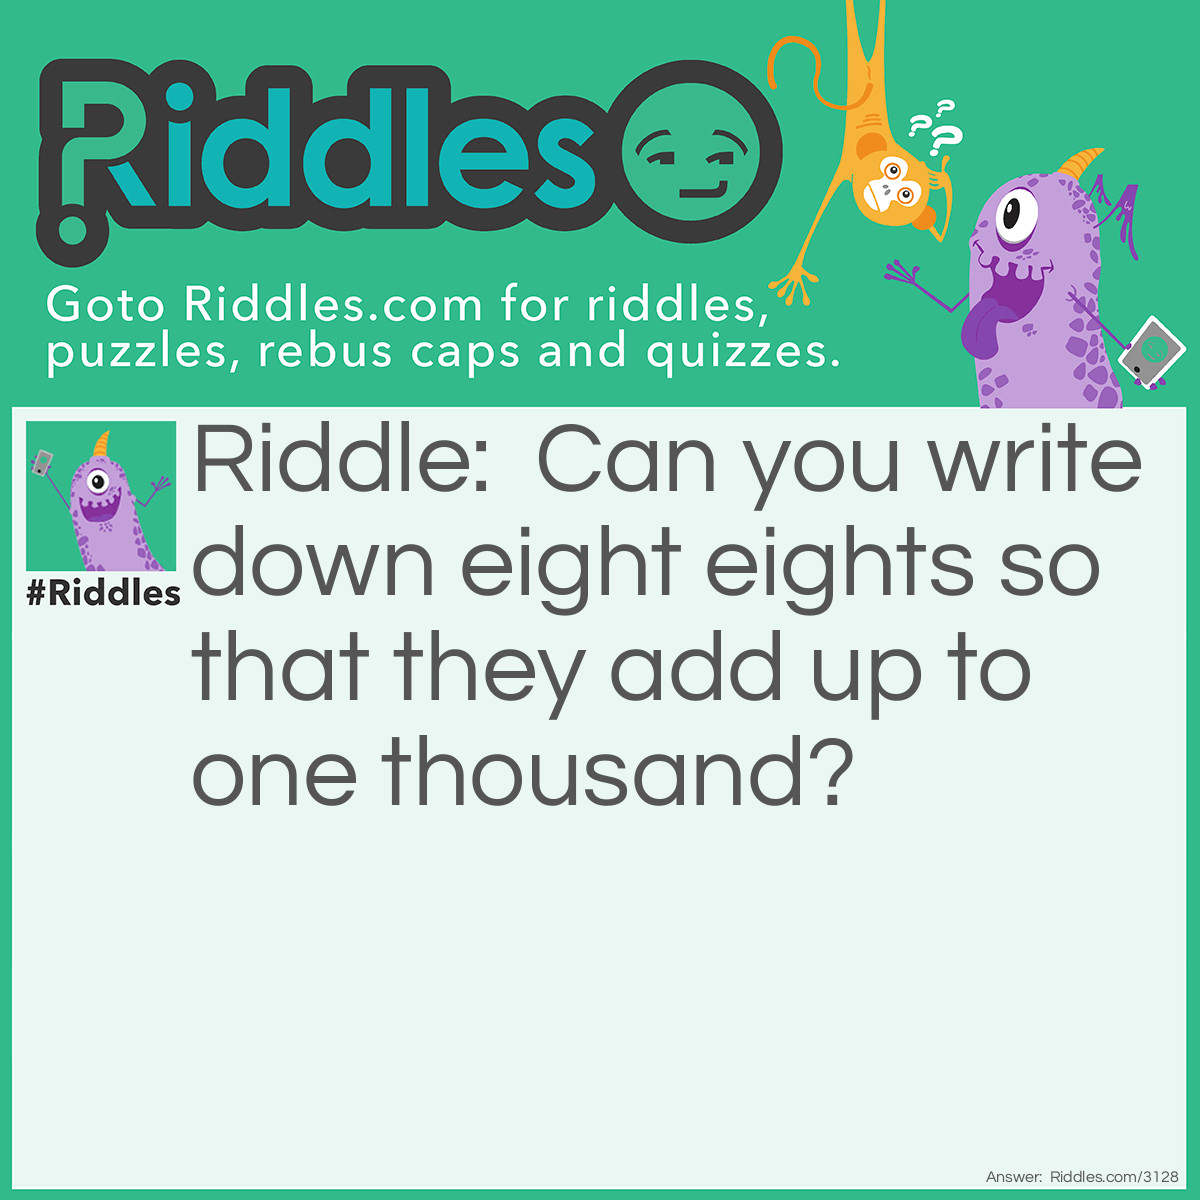 Riddle: How can you write down eight eights so that they add up to one thousand? Answer: 888 + 88 + 8 + 8 + 8 = 1000.